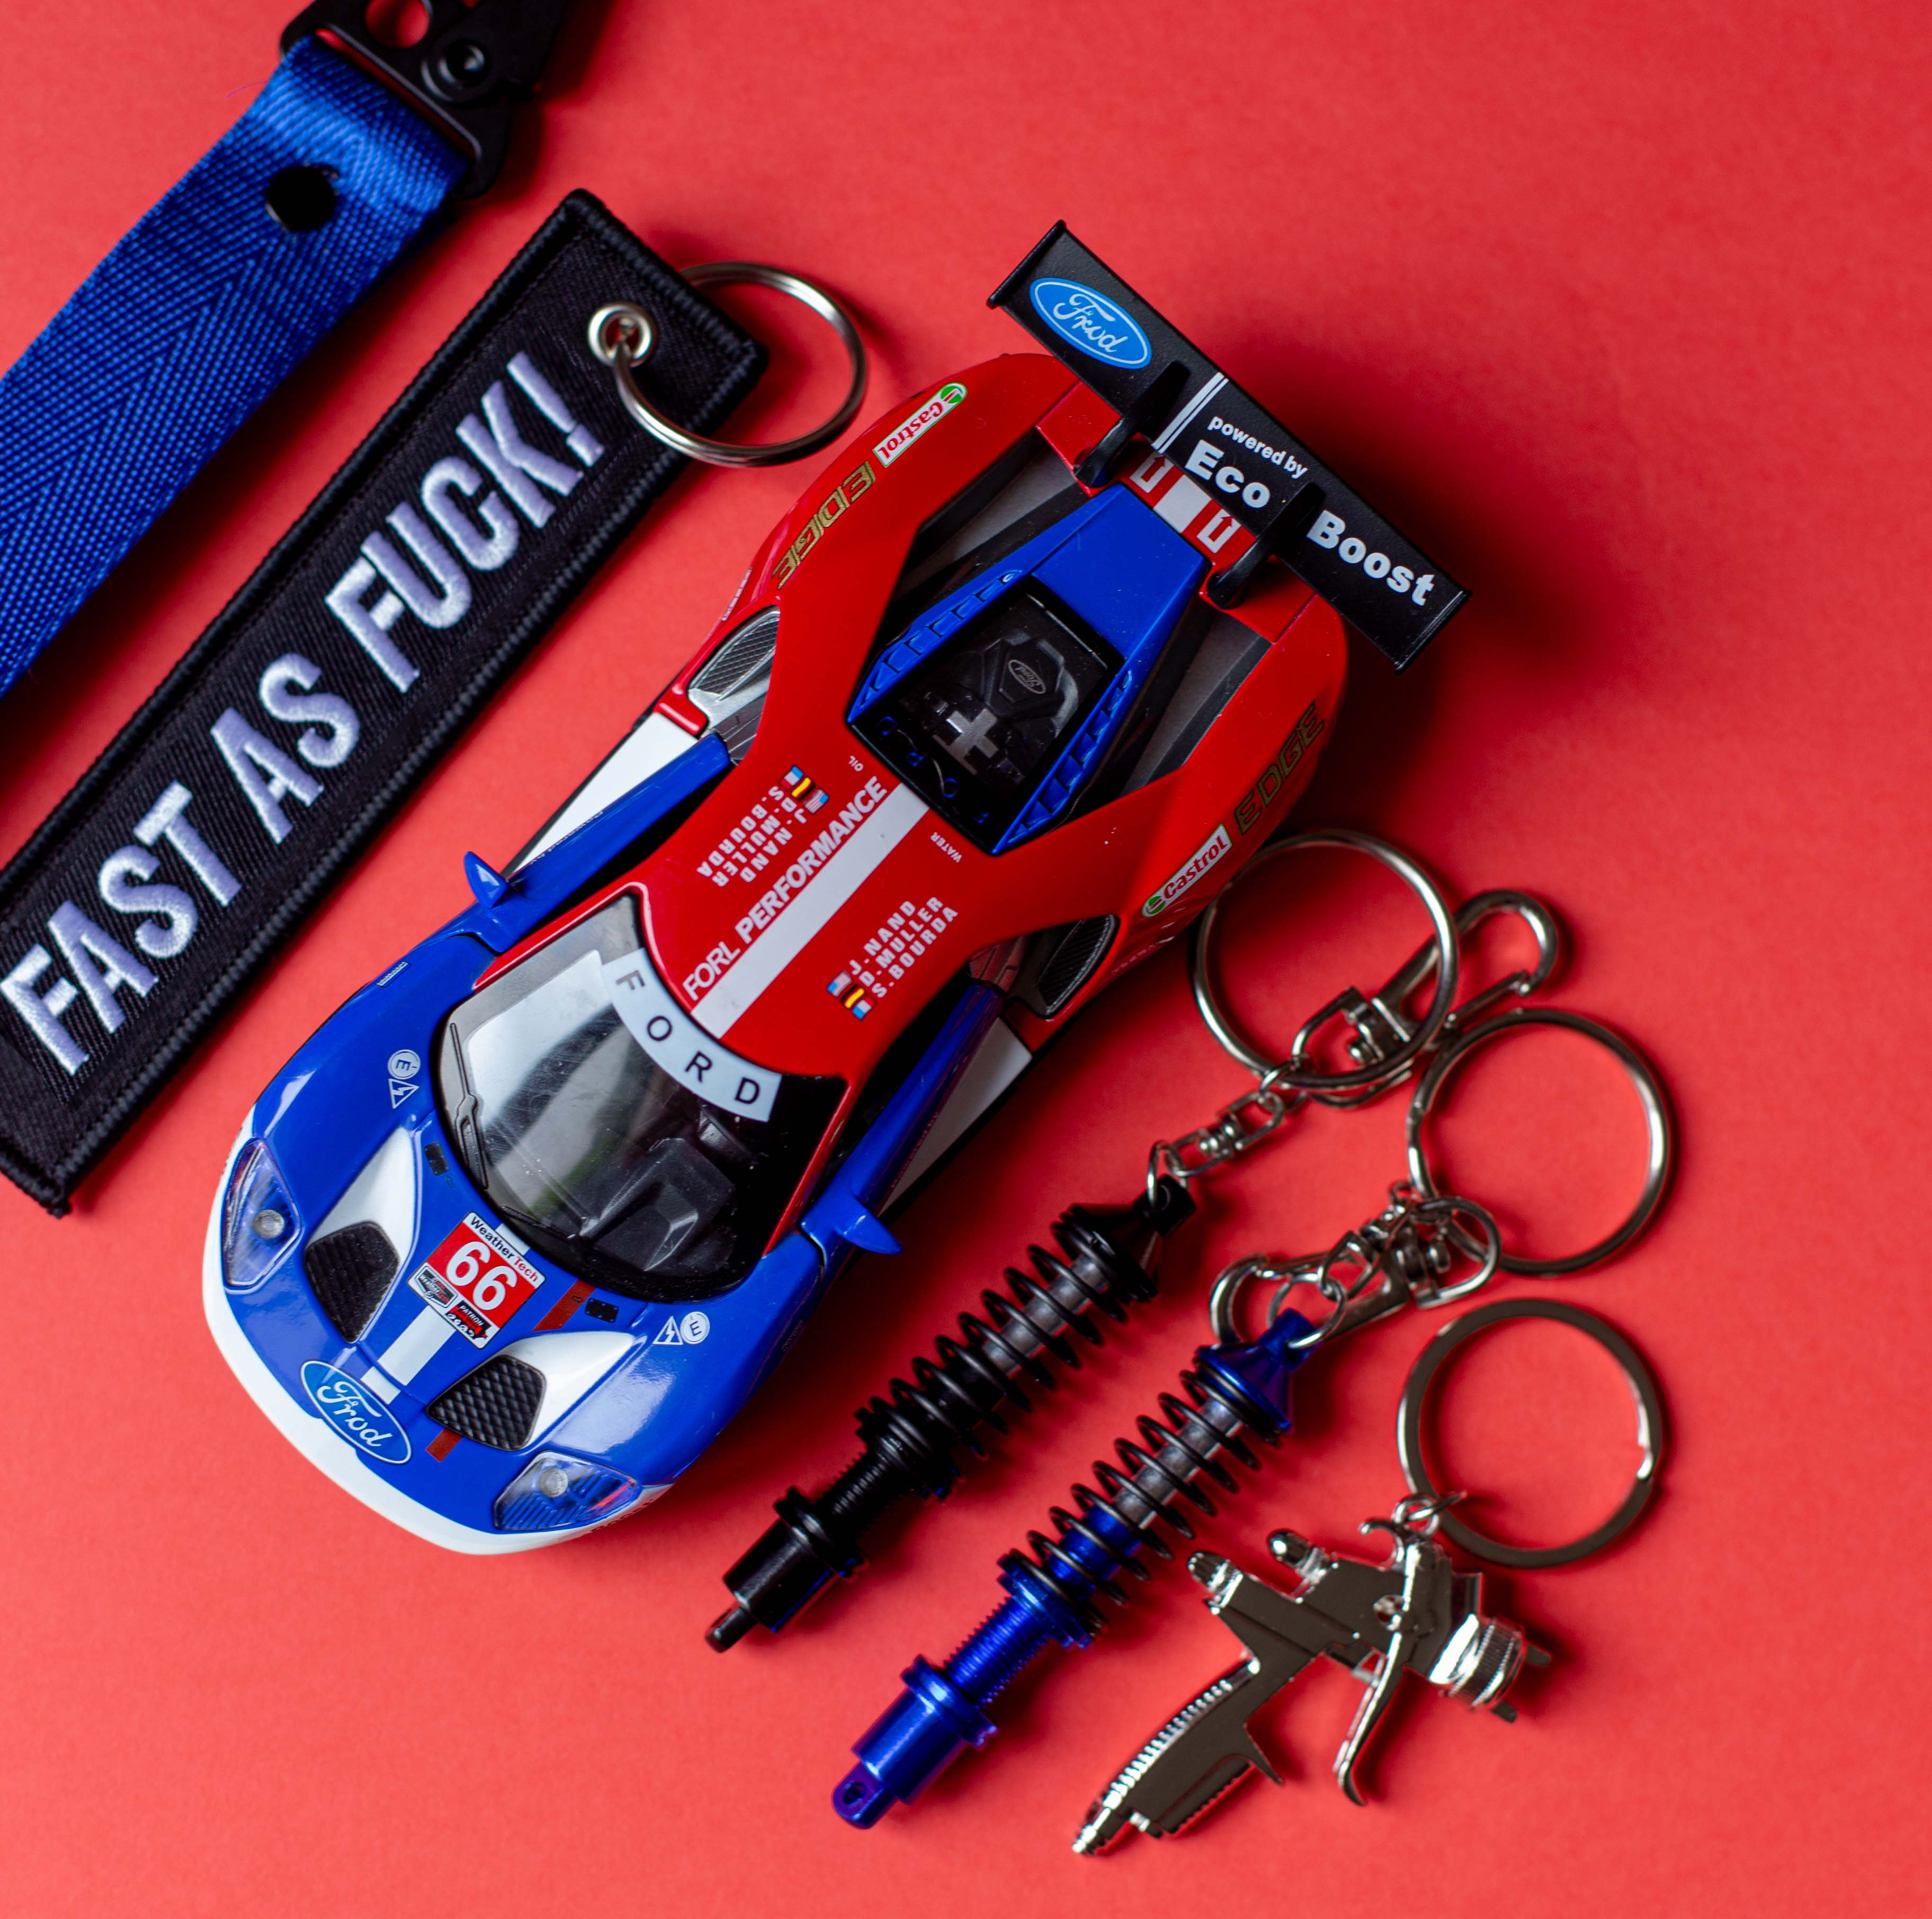 JDM-style and motorsport related gifts and scale models